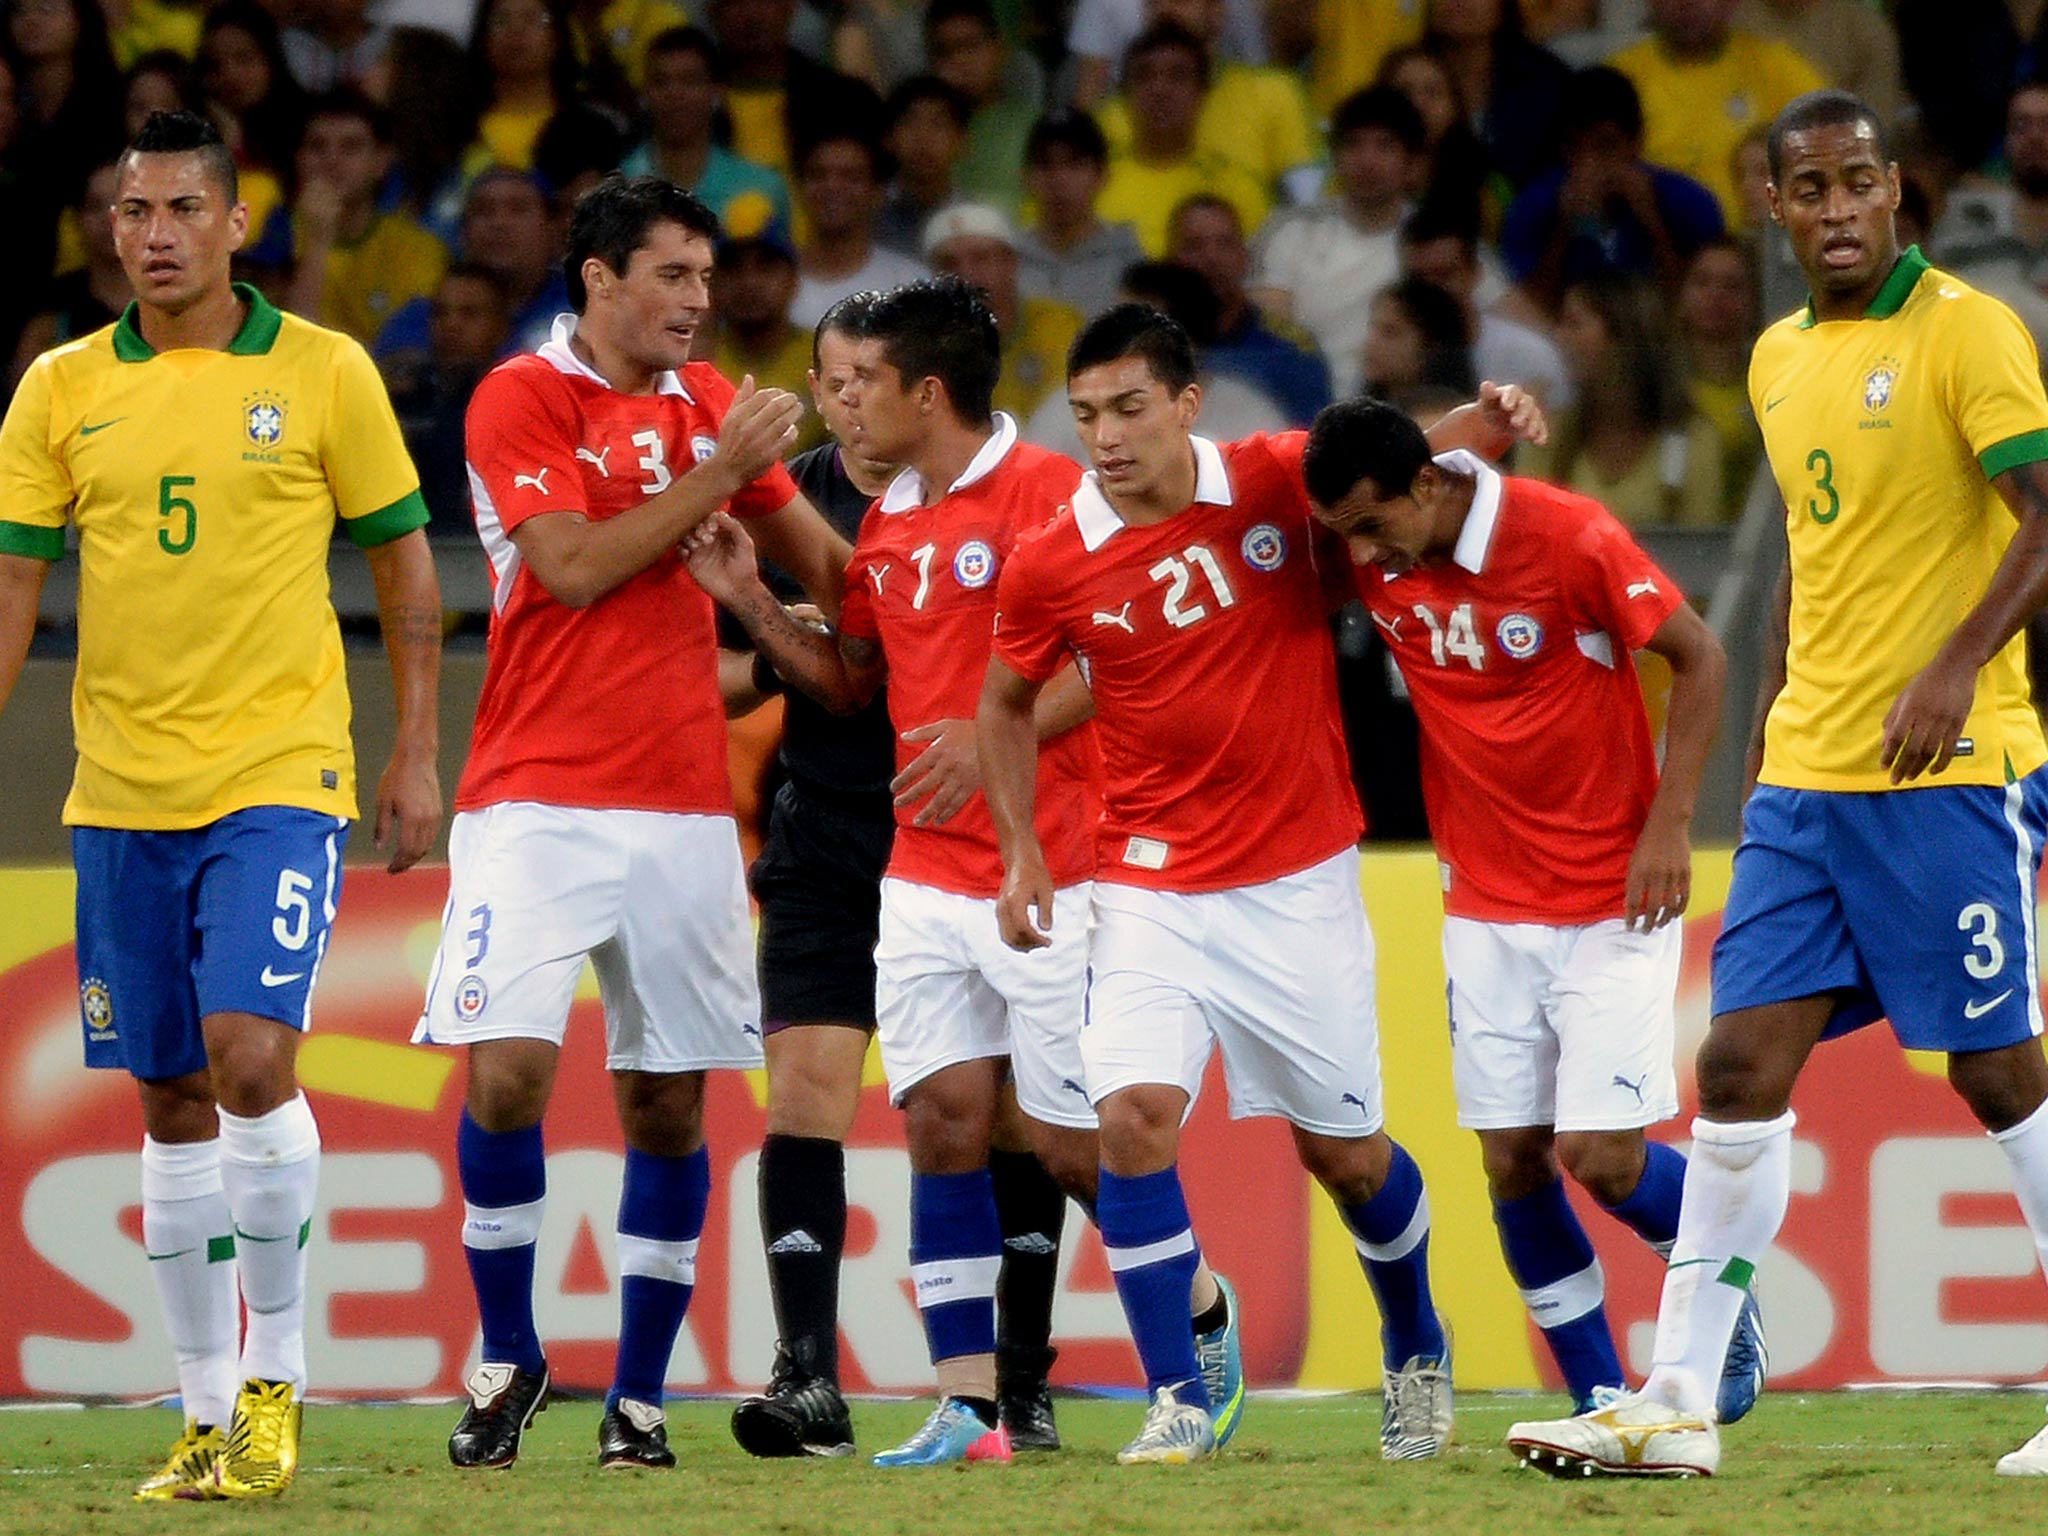 Chile's Marcos Gonzalez (2nd L) celebrates with teammates after scoring against Brazil, during their friendly football match at the Mineirao stadium